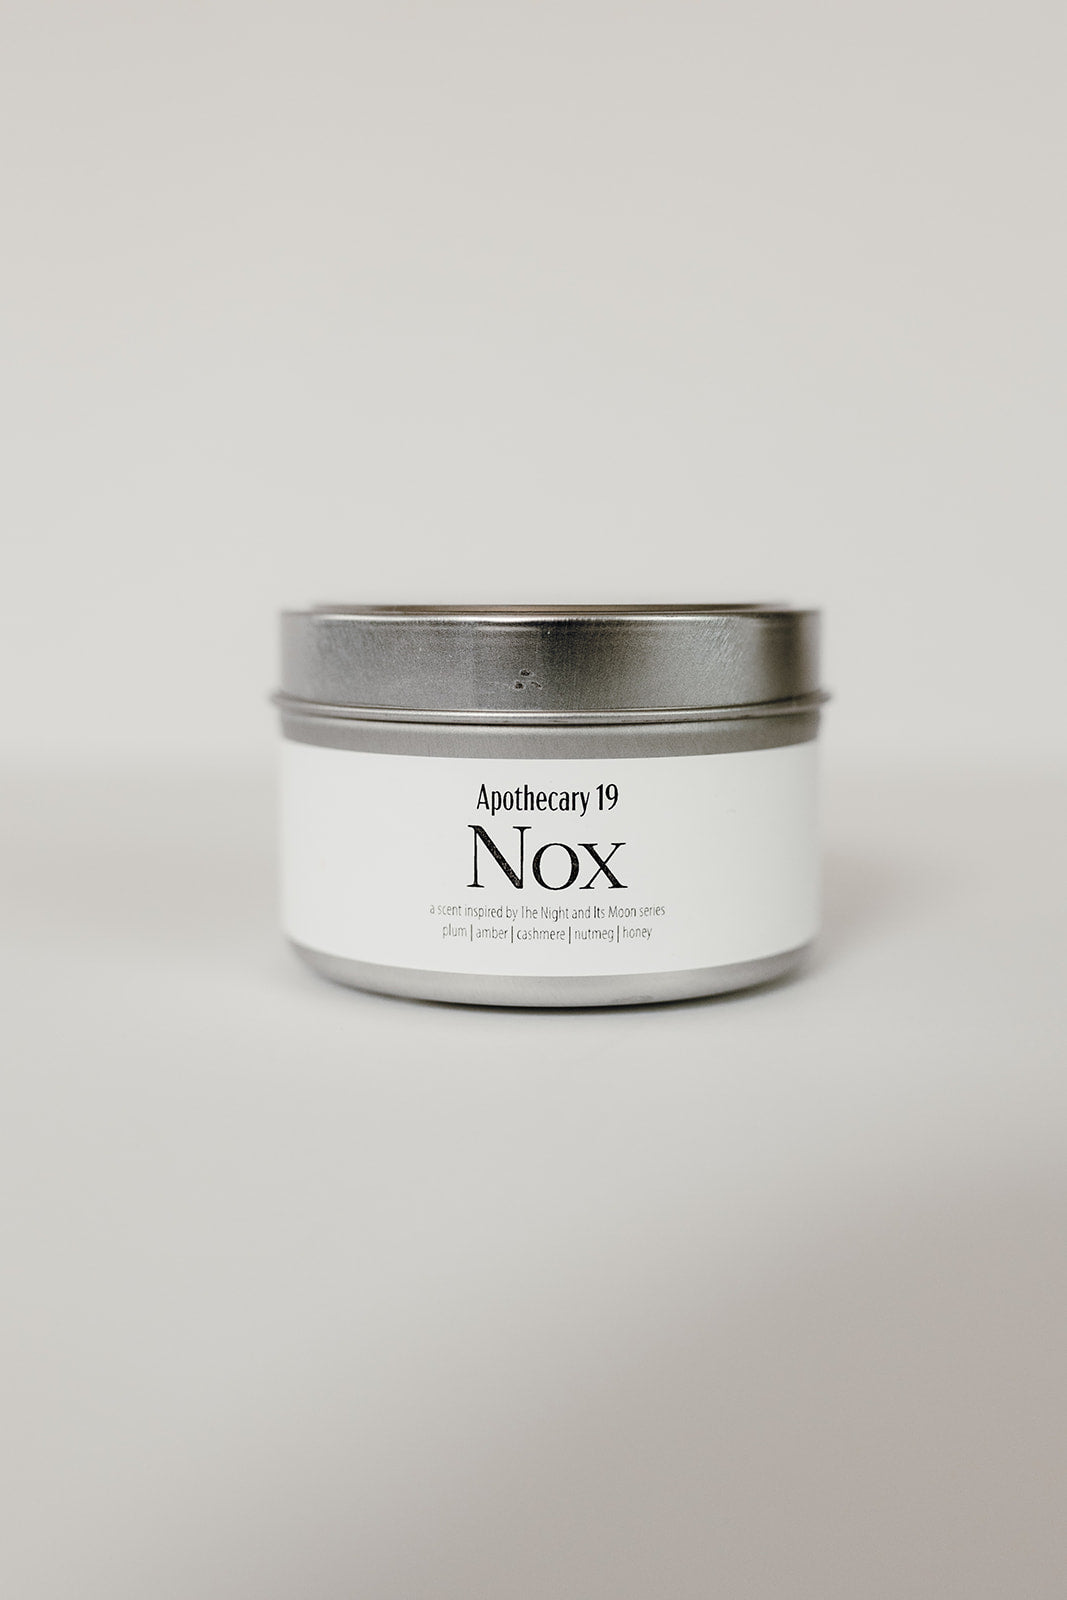 Nox — a scent inspired by The Night and Its Moon